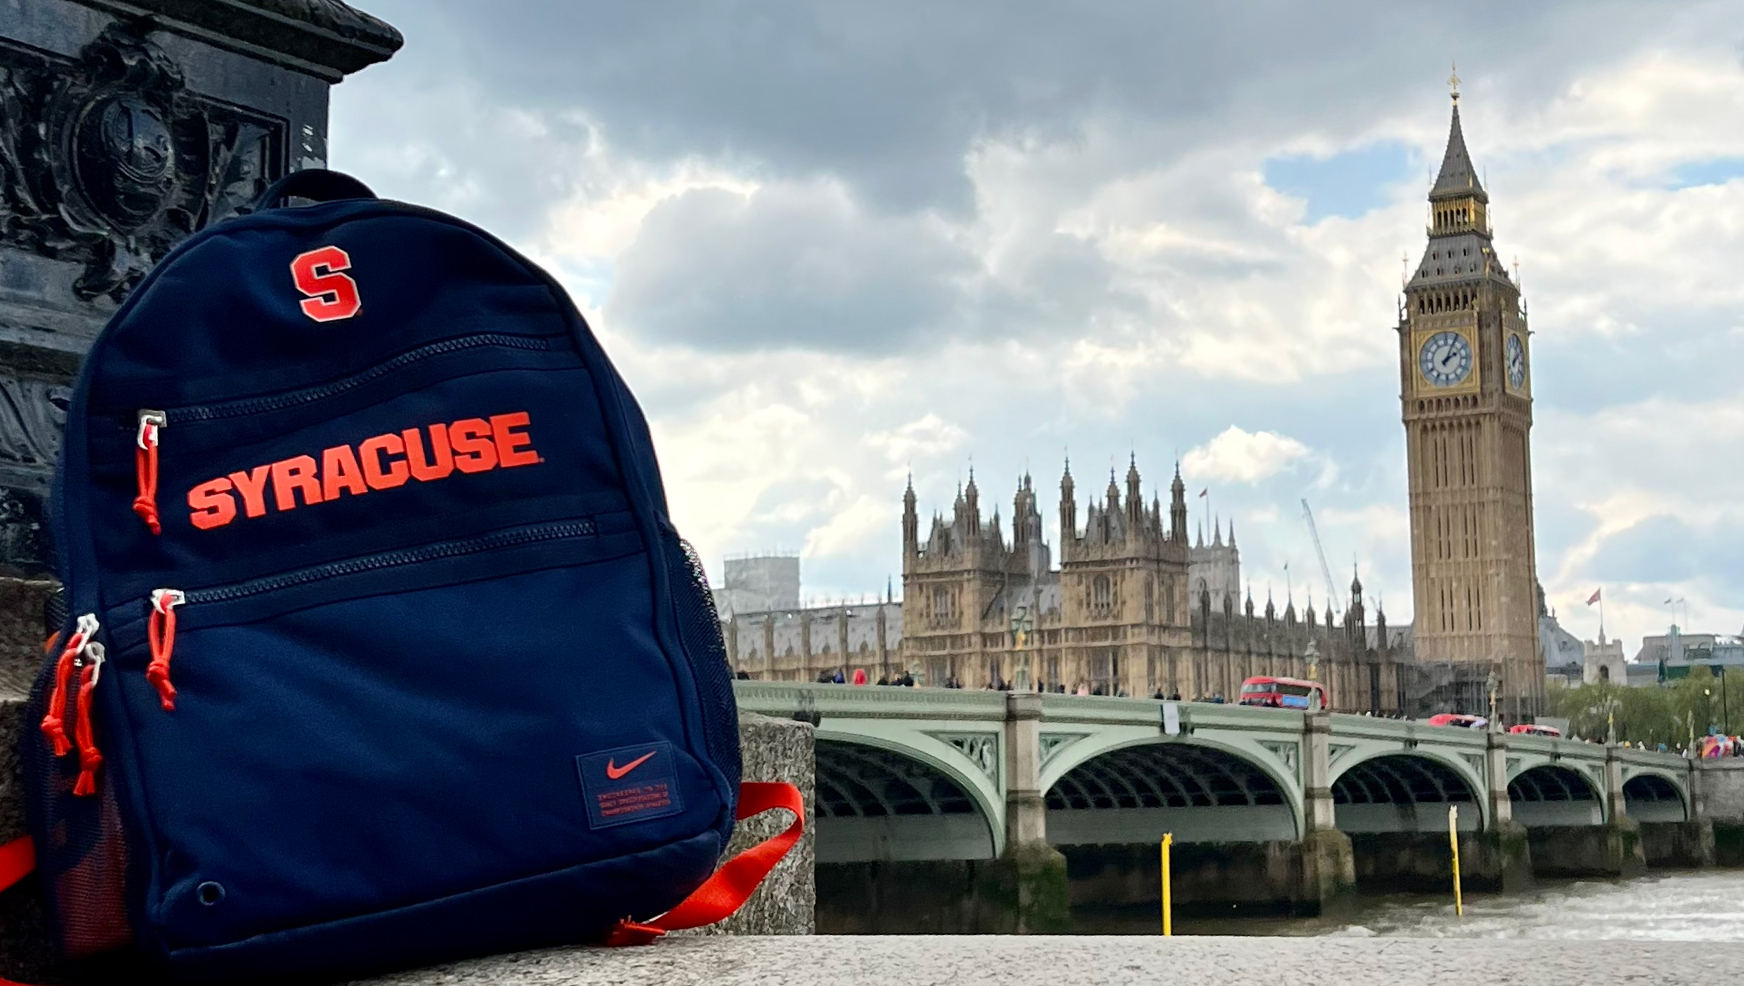 Syracuse University branded backpack with Big Ben in background